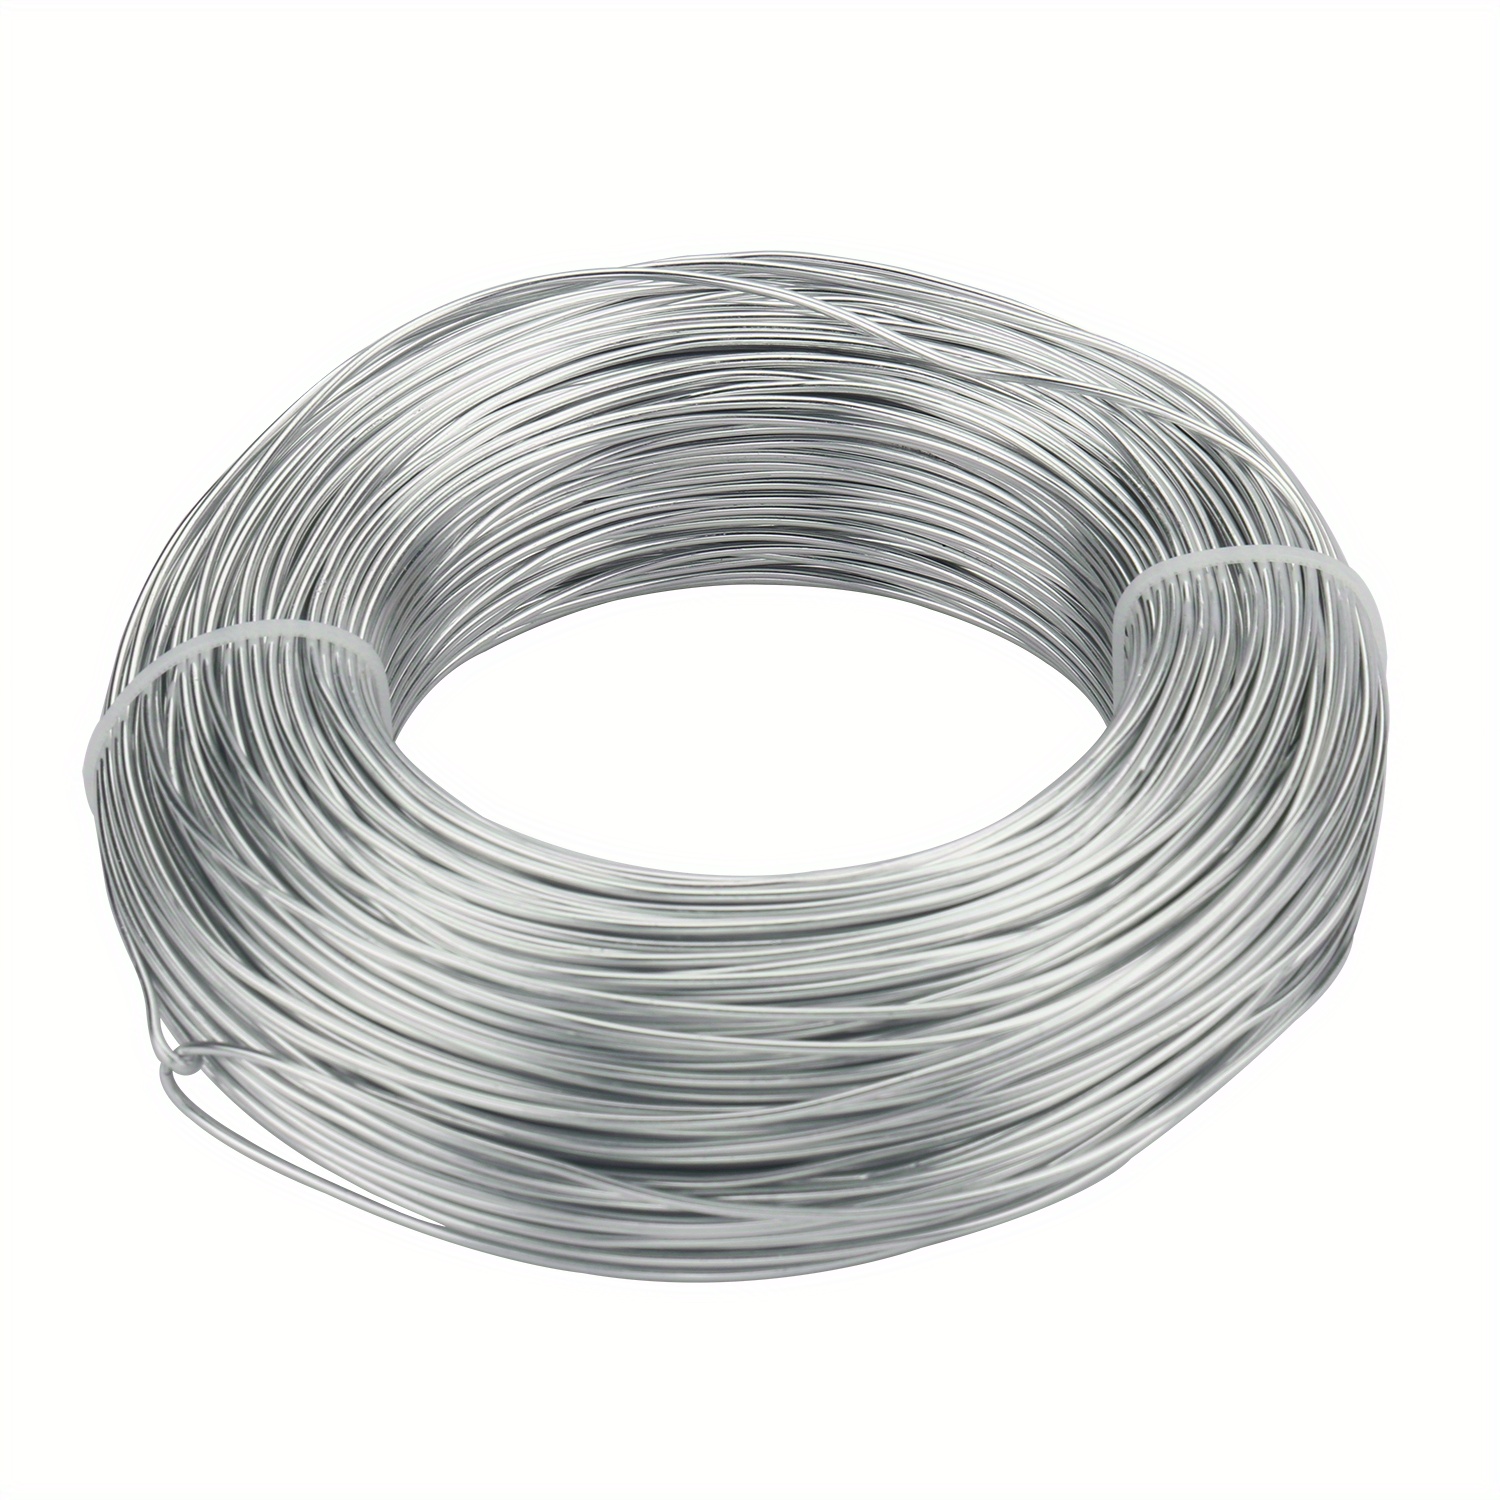 10m/roll 0.3-1mm Stainless Steel Wire For Jewelry Making Beads